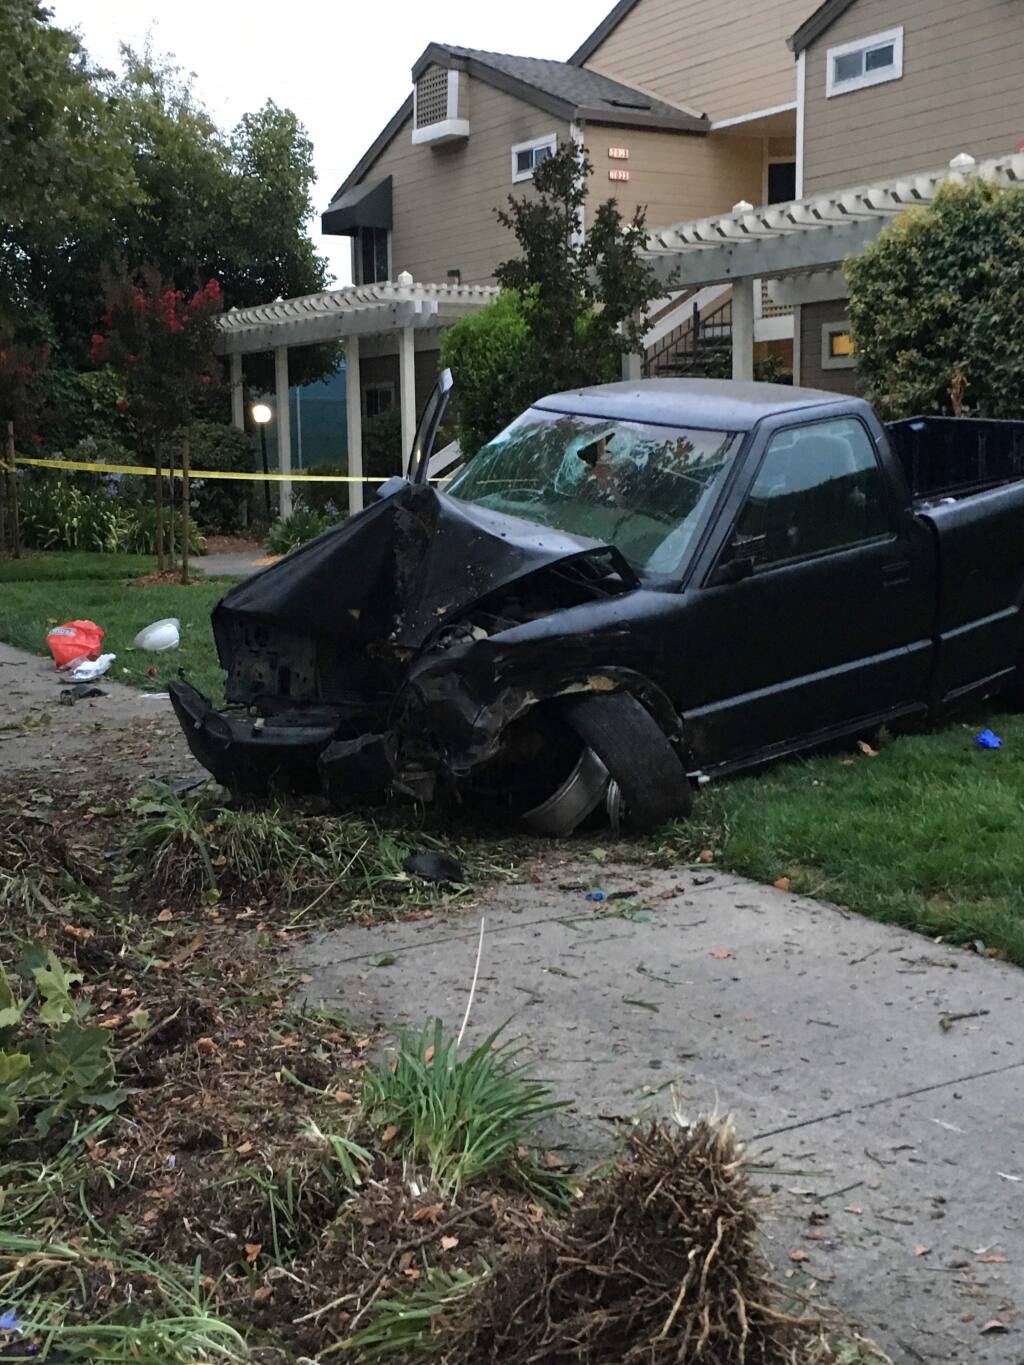 A Santa Rosa man was seriously injured when he crashed his pickup into a tree in the Piner Road area on Sunday, July 30, 2017. (COURTESY PHOTO)